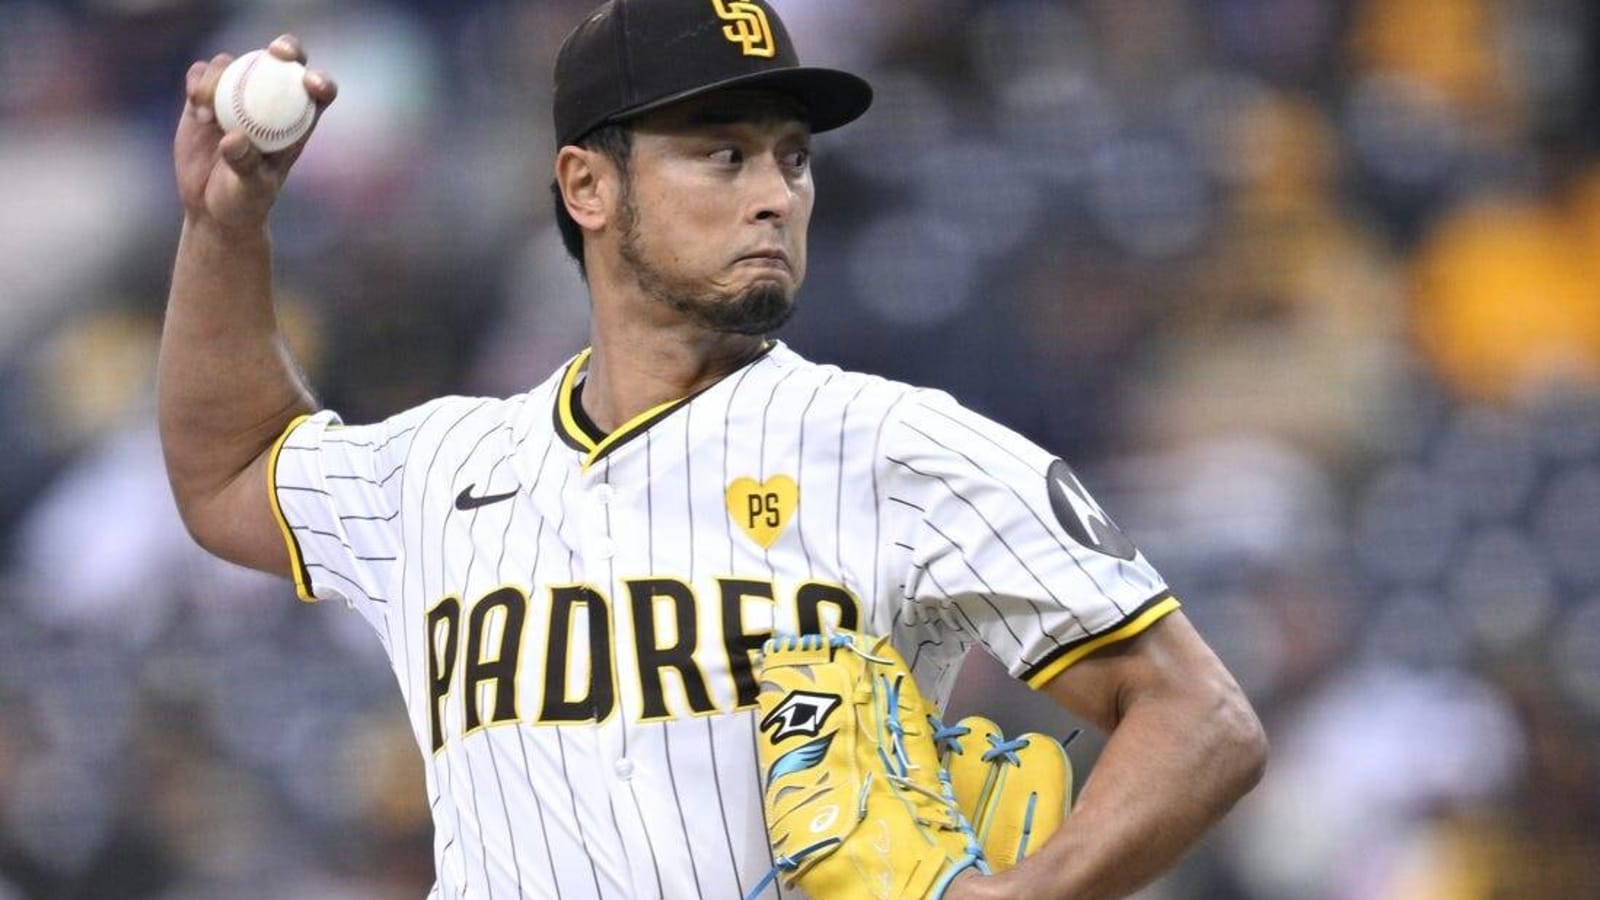 Padres and Yu Darvish, with extra day of rest, meet Braves